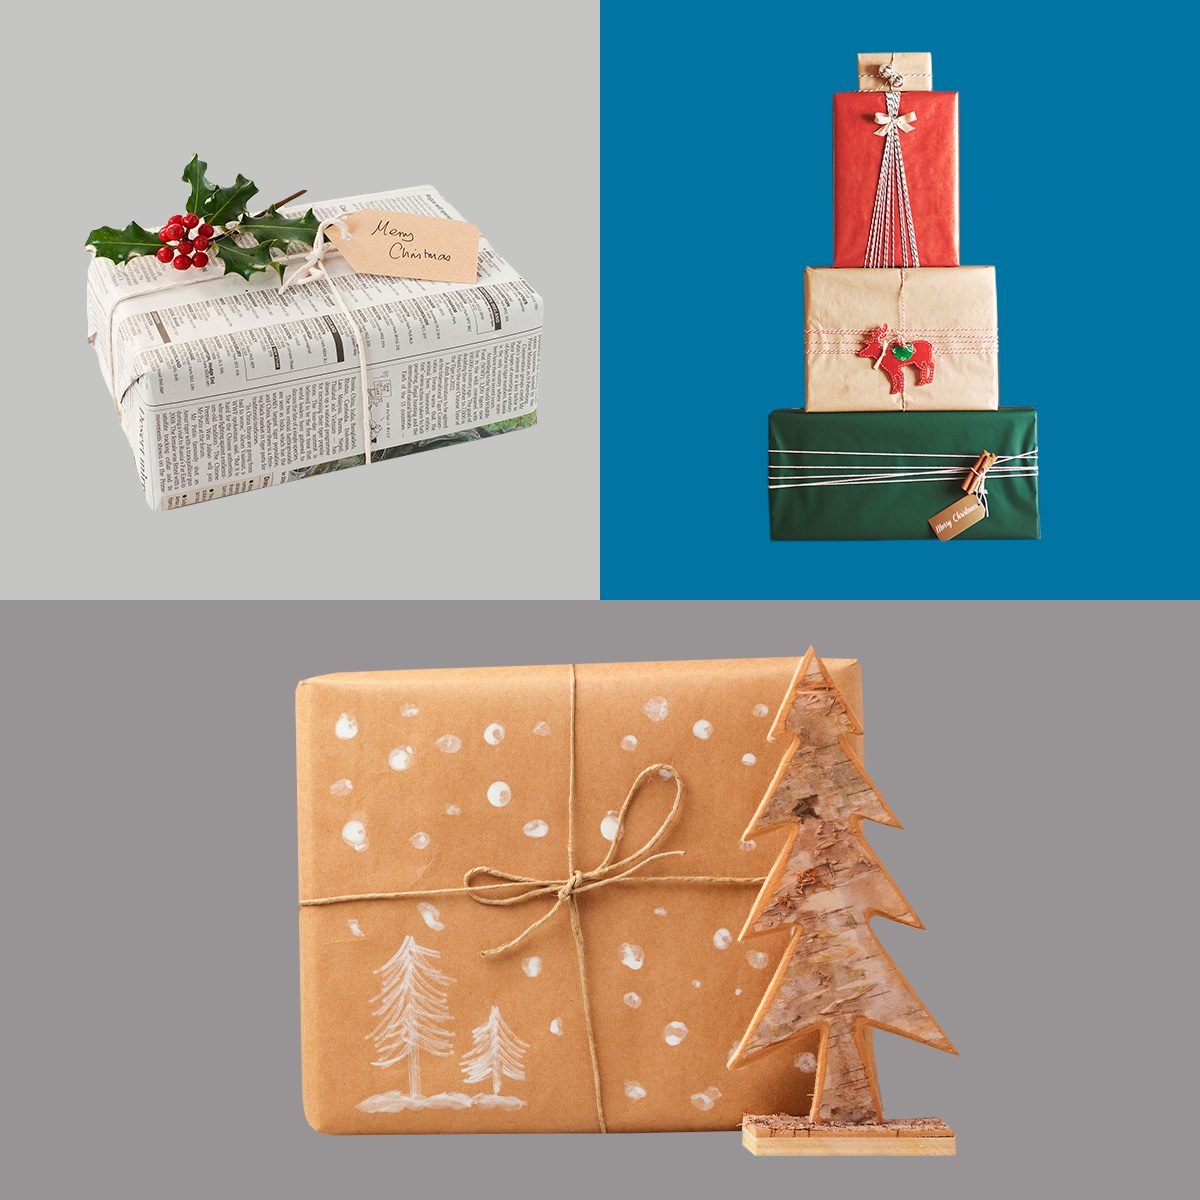 https://www.rd.com/wp-content/uploads/2021/11/feature_50-christmas-wrapping-ideas-2021.jpg